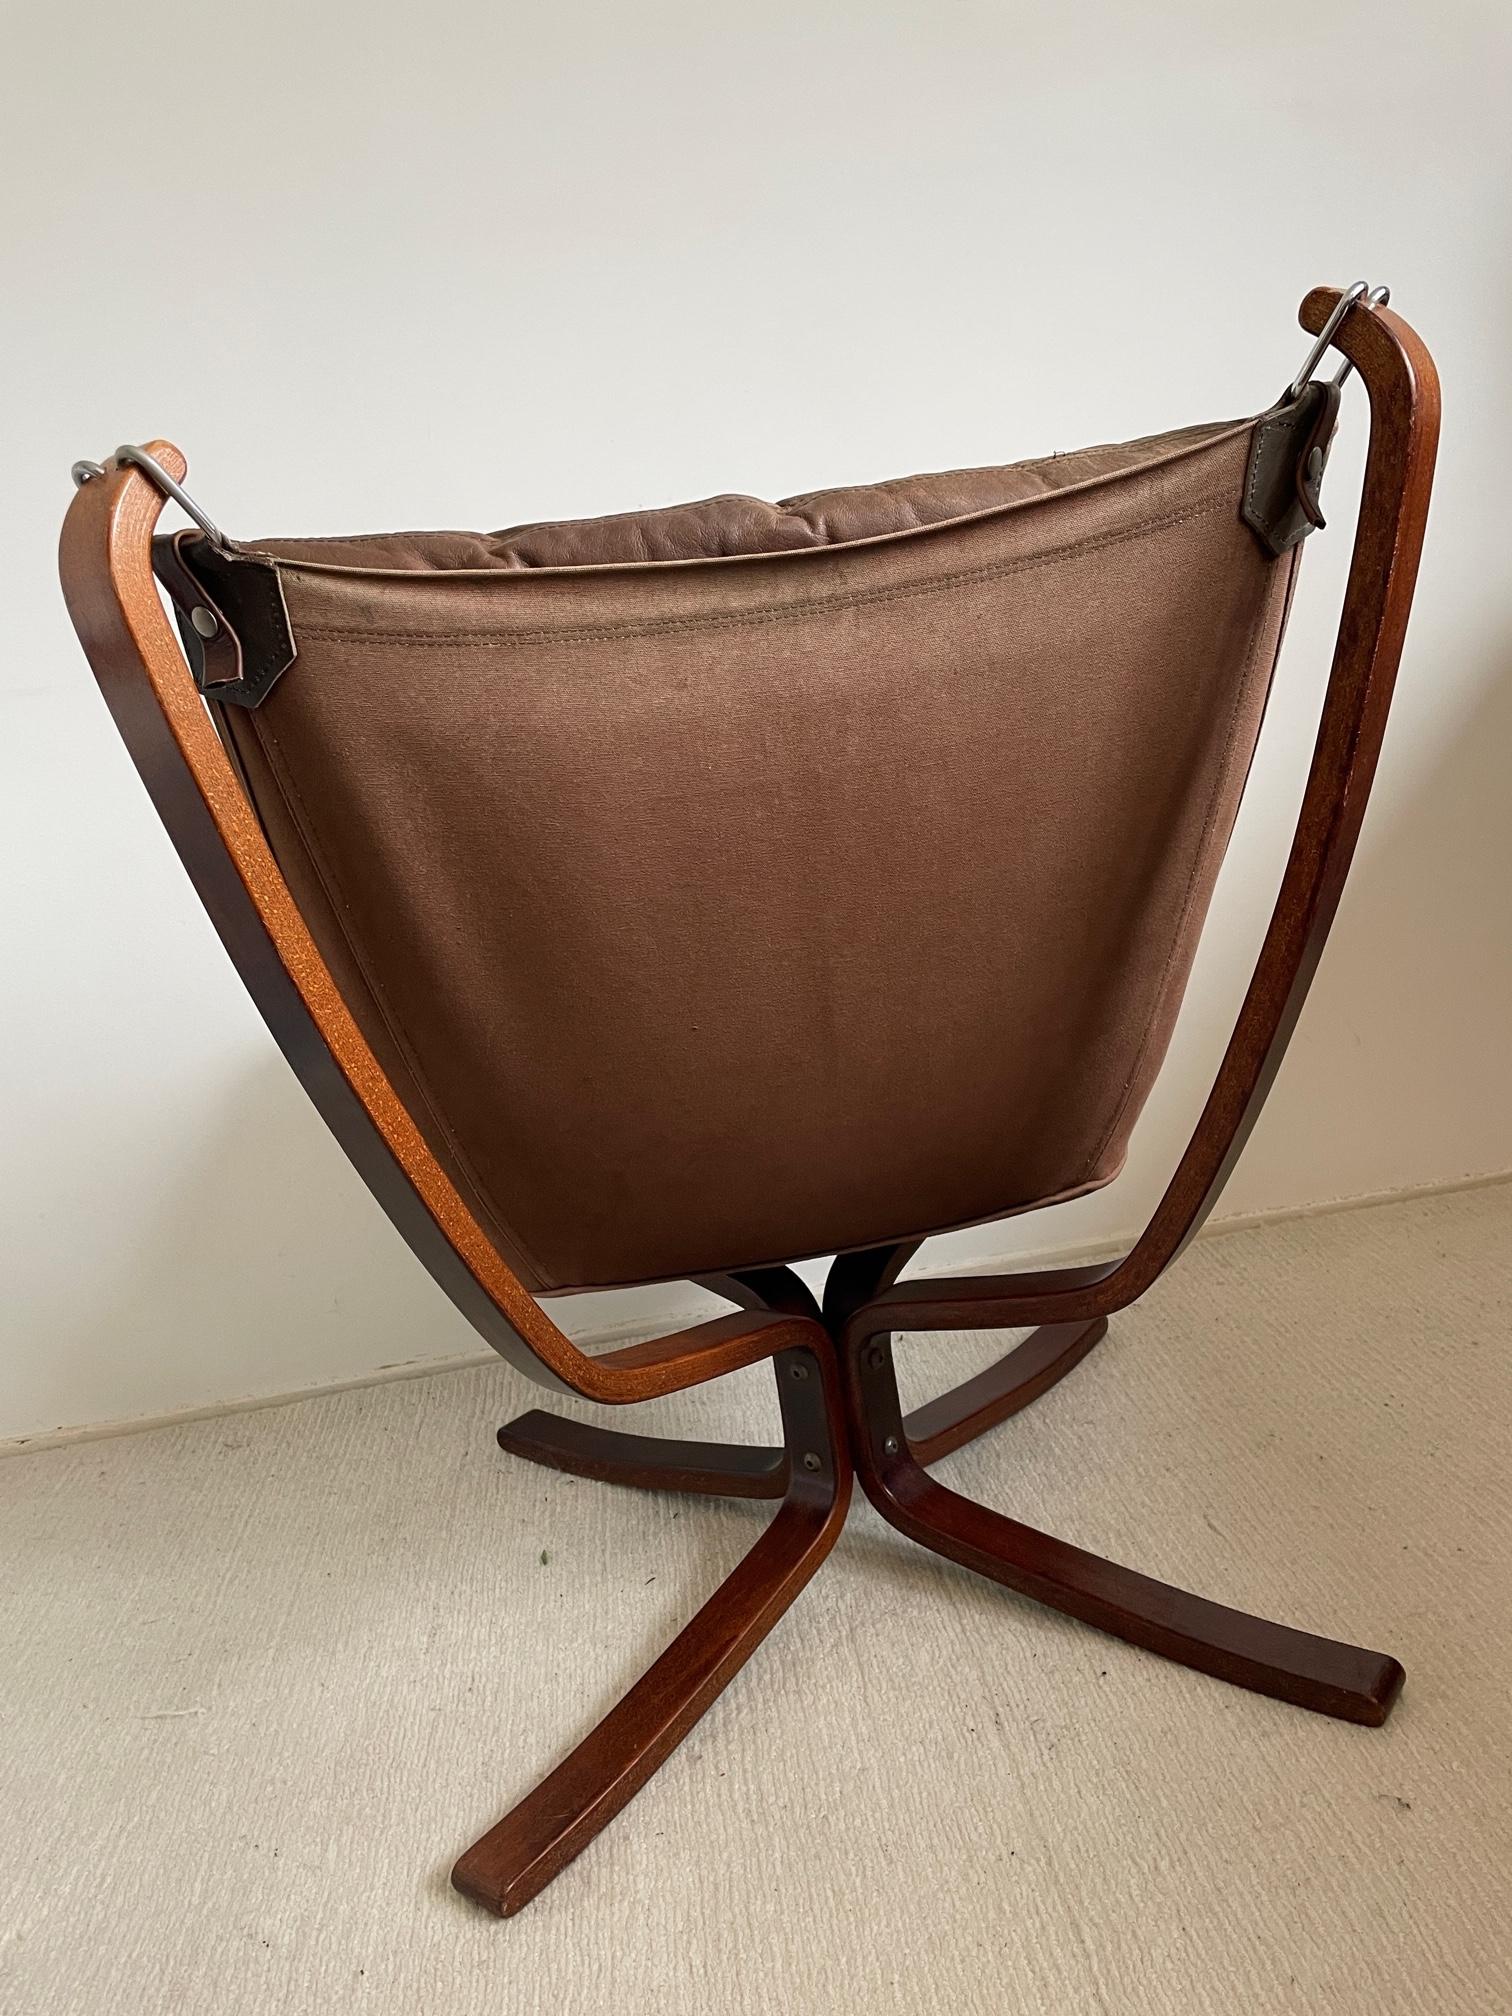 Leather Vintage Falcon Chair by Sigurd Ressell for Vatne Møbler, Norway, 1970s Design